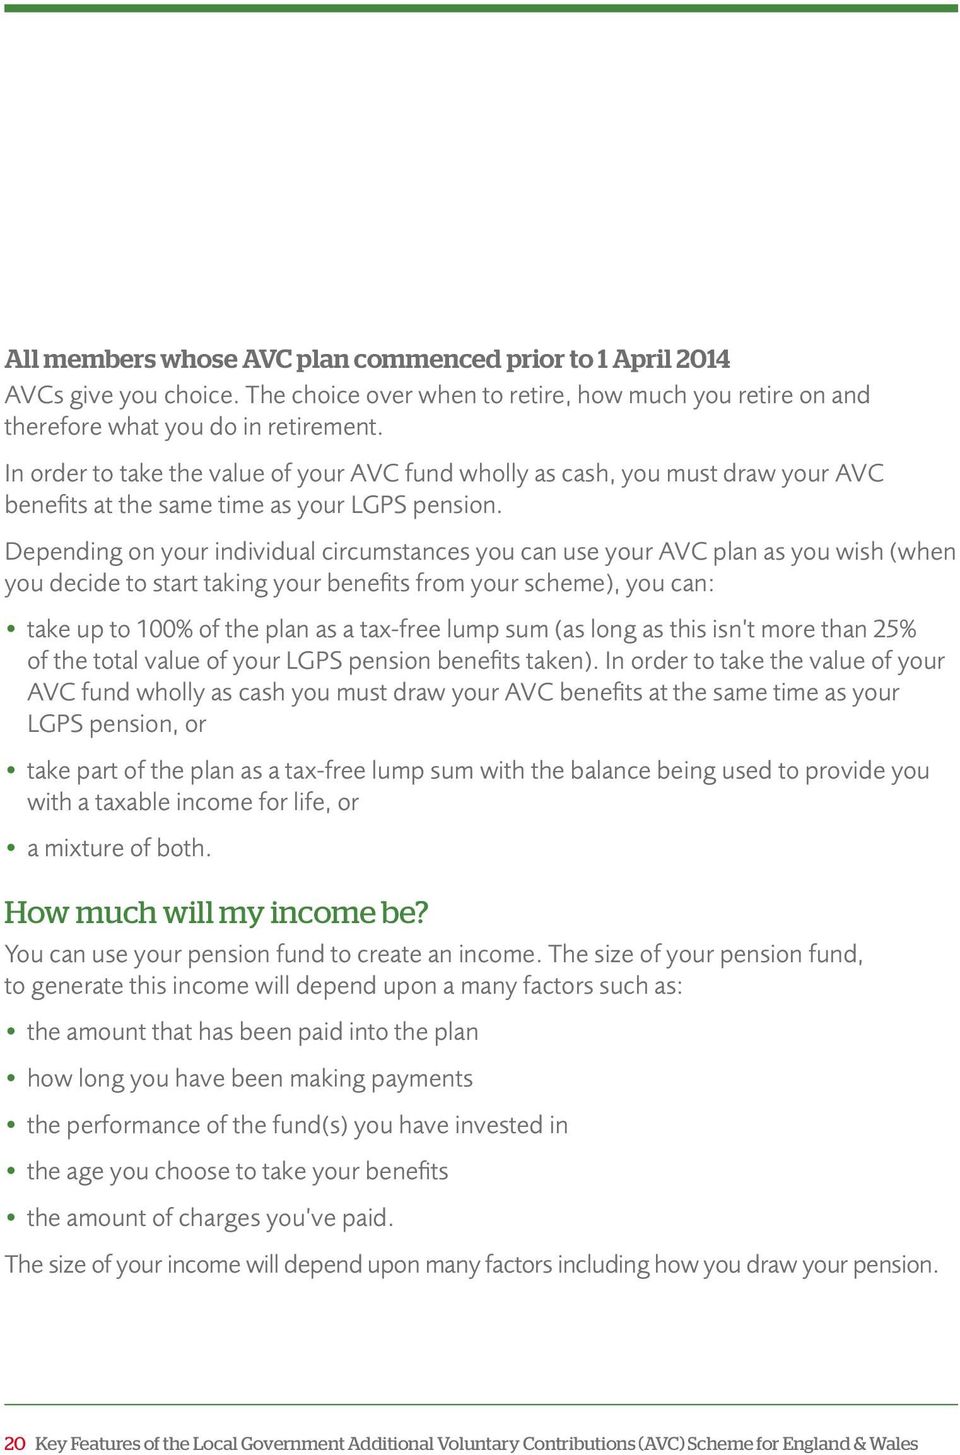 Depending on your individual circumstances you can use your AVC plan as you wish (when you decide to start taking your benefits from your scheme), you can: take up to 100% of the plan as a tax-free